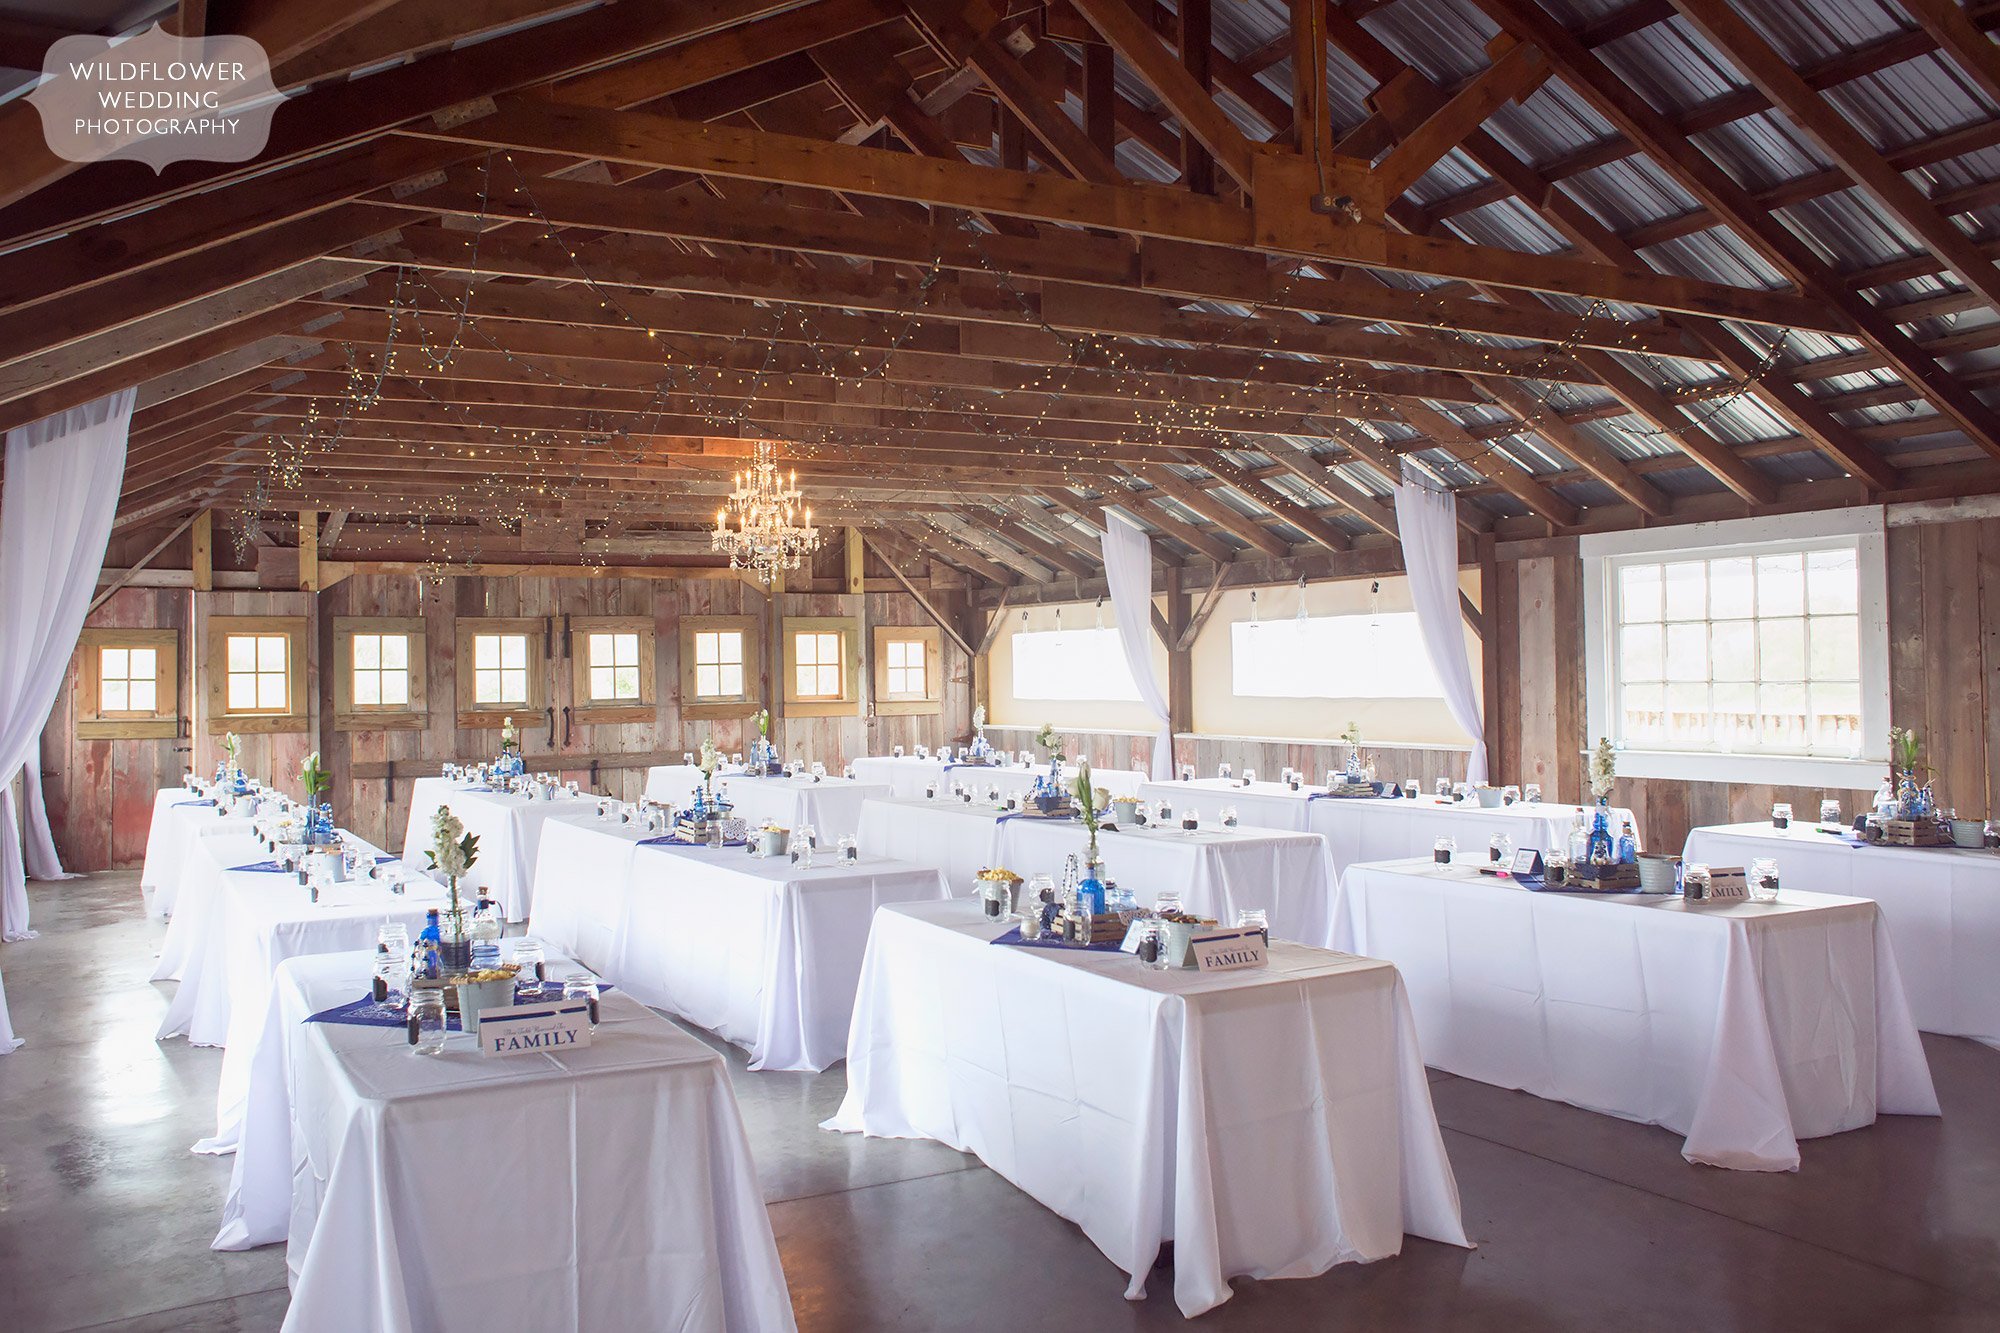 Family style tables are set up inside of the Weston Red Barn for this farm wedding in MO.